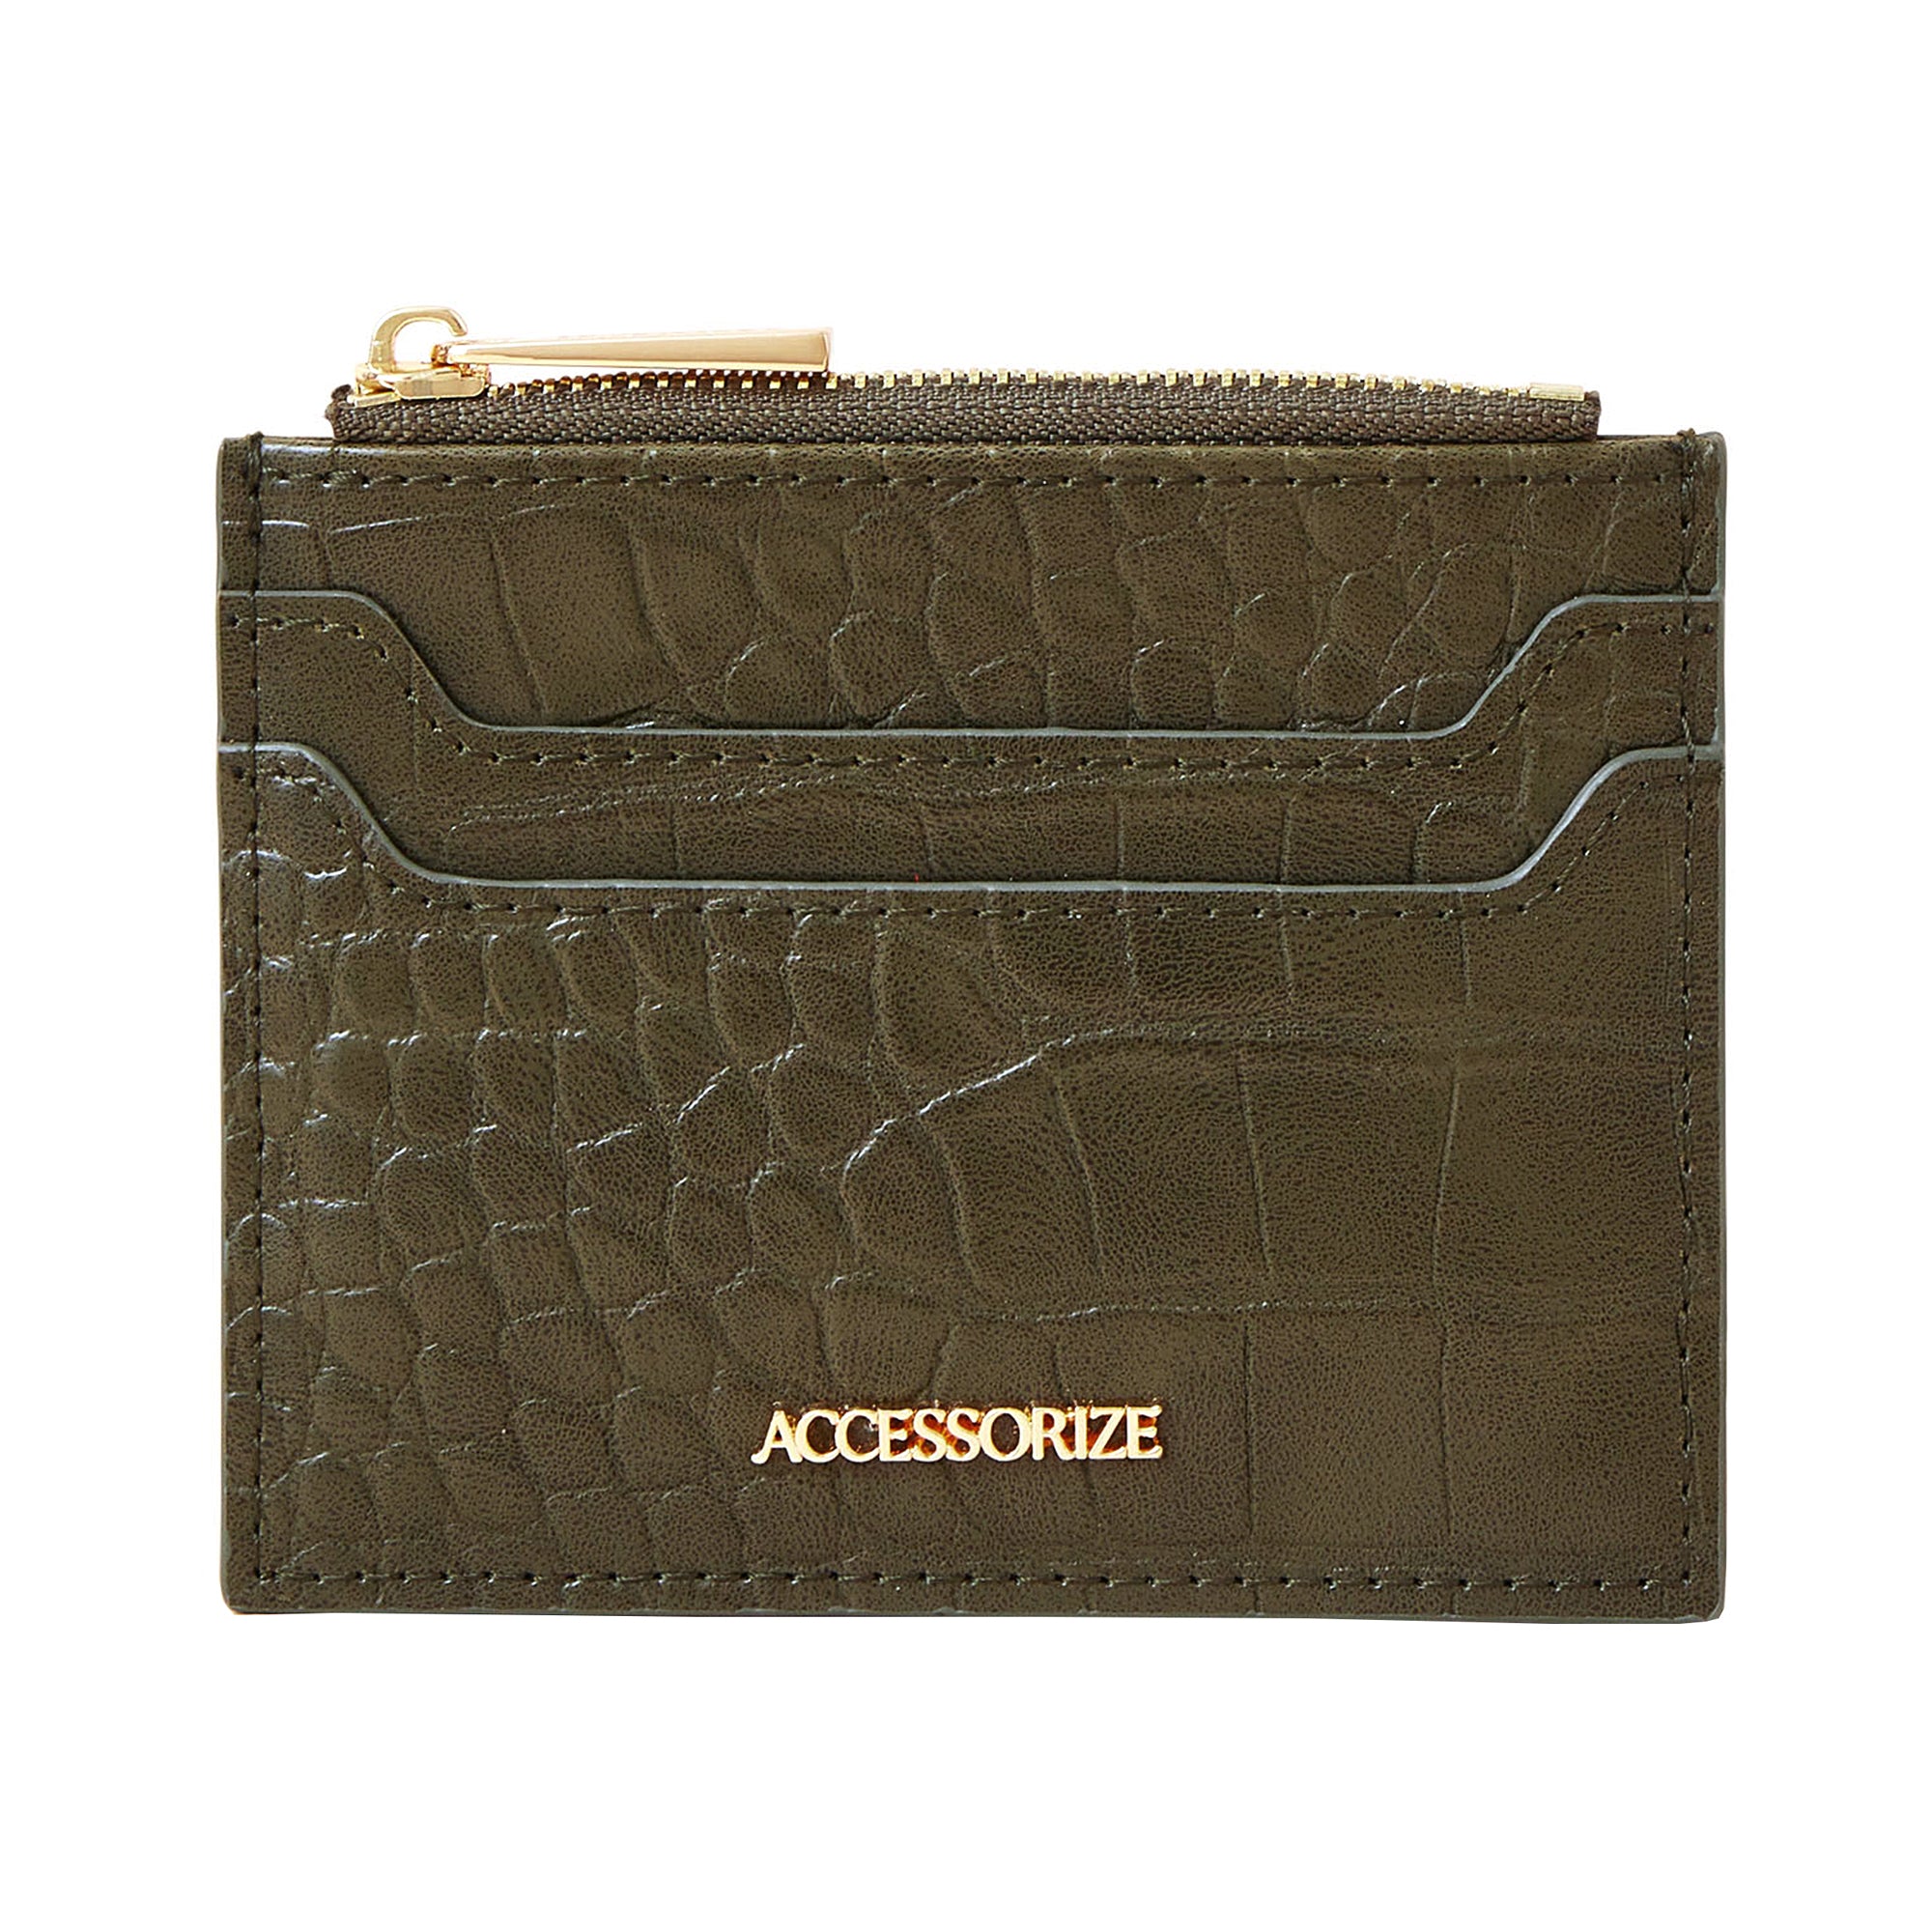 Accessorize London Women'S Faux Leather Khaki Embroidered Cardholder